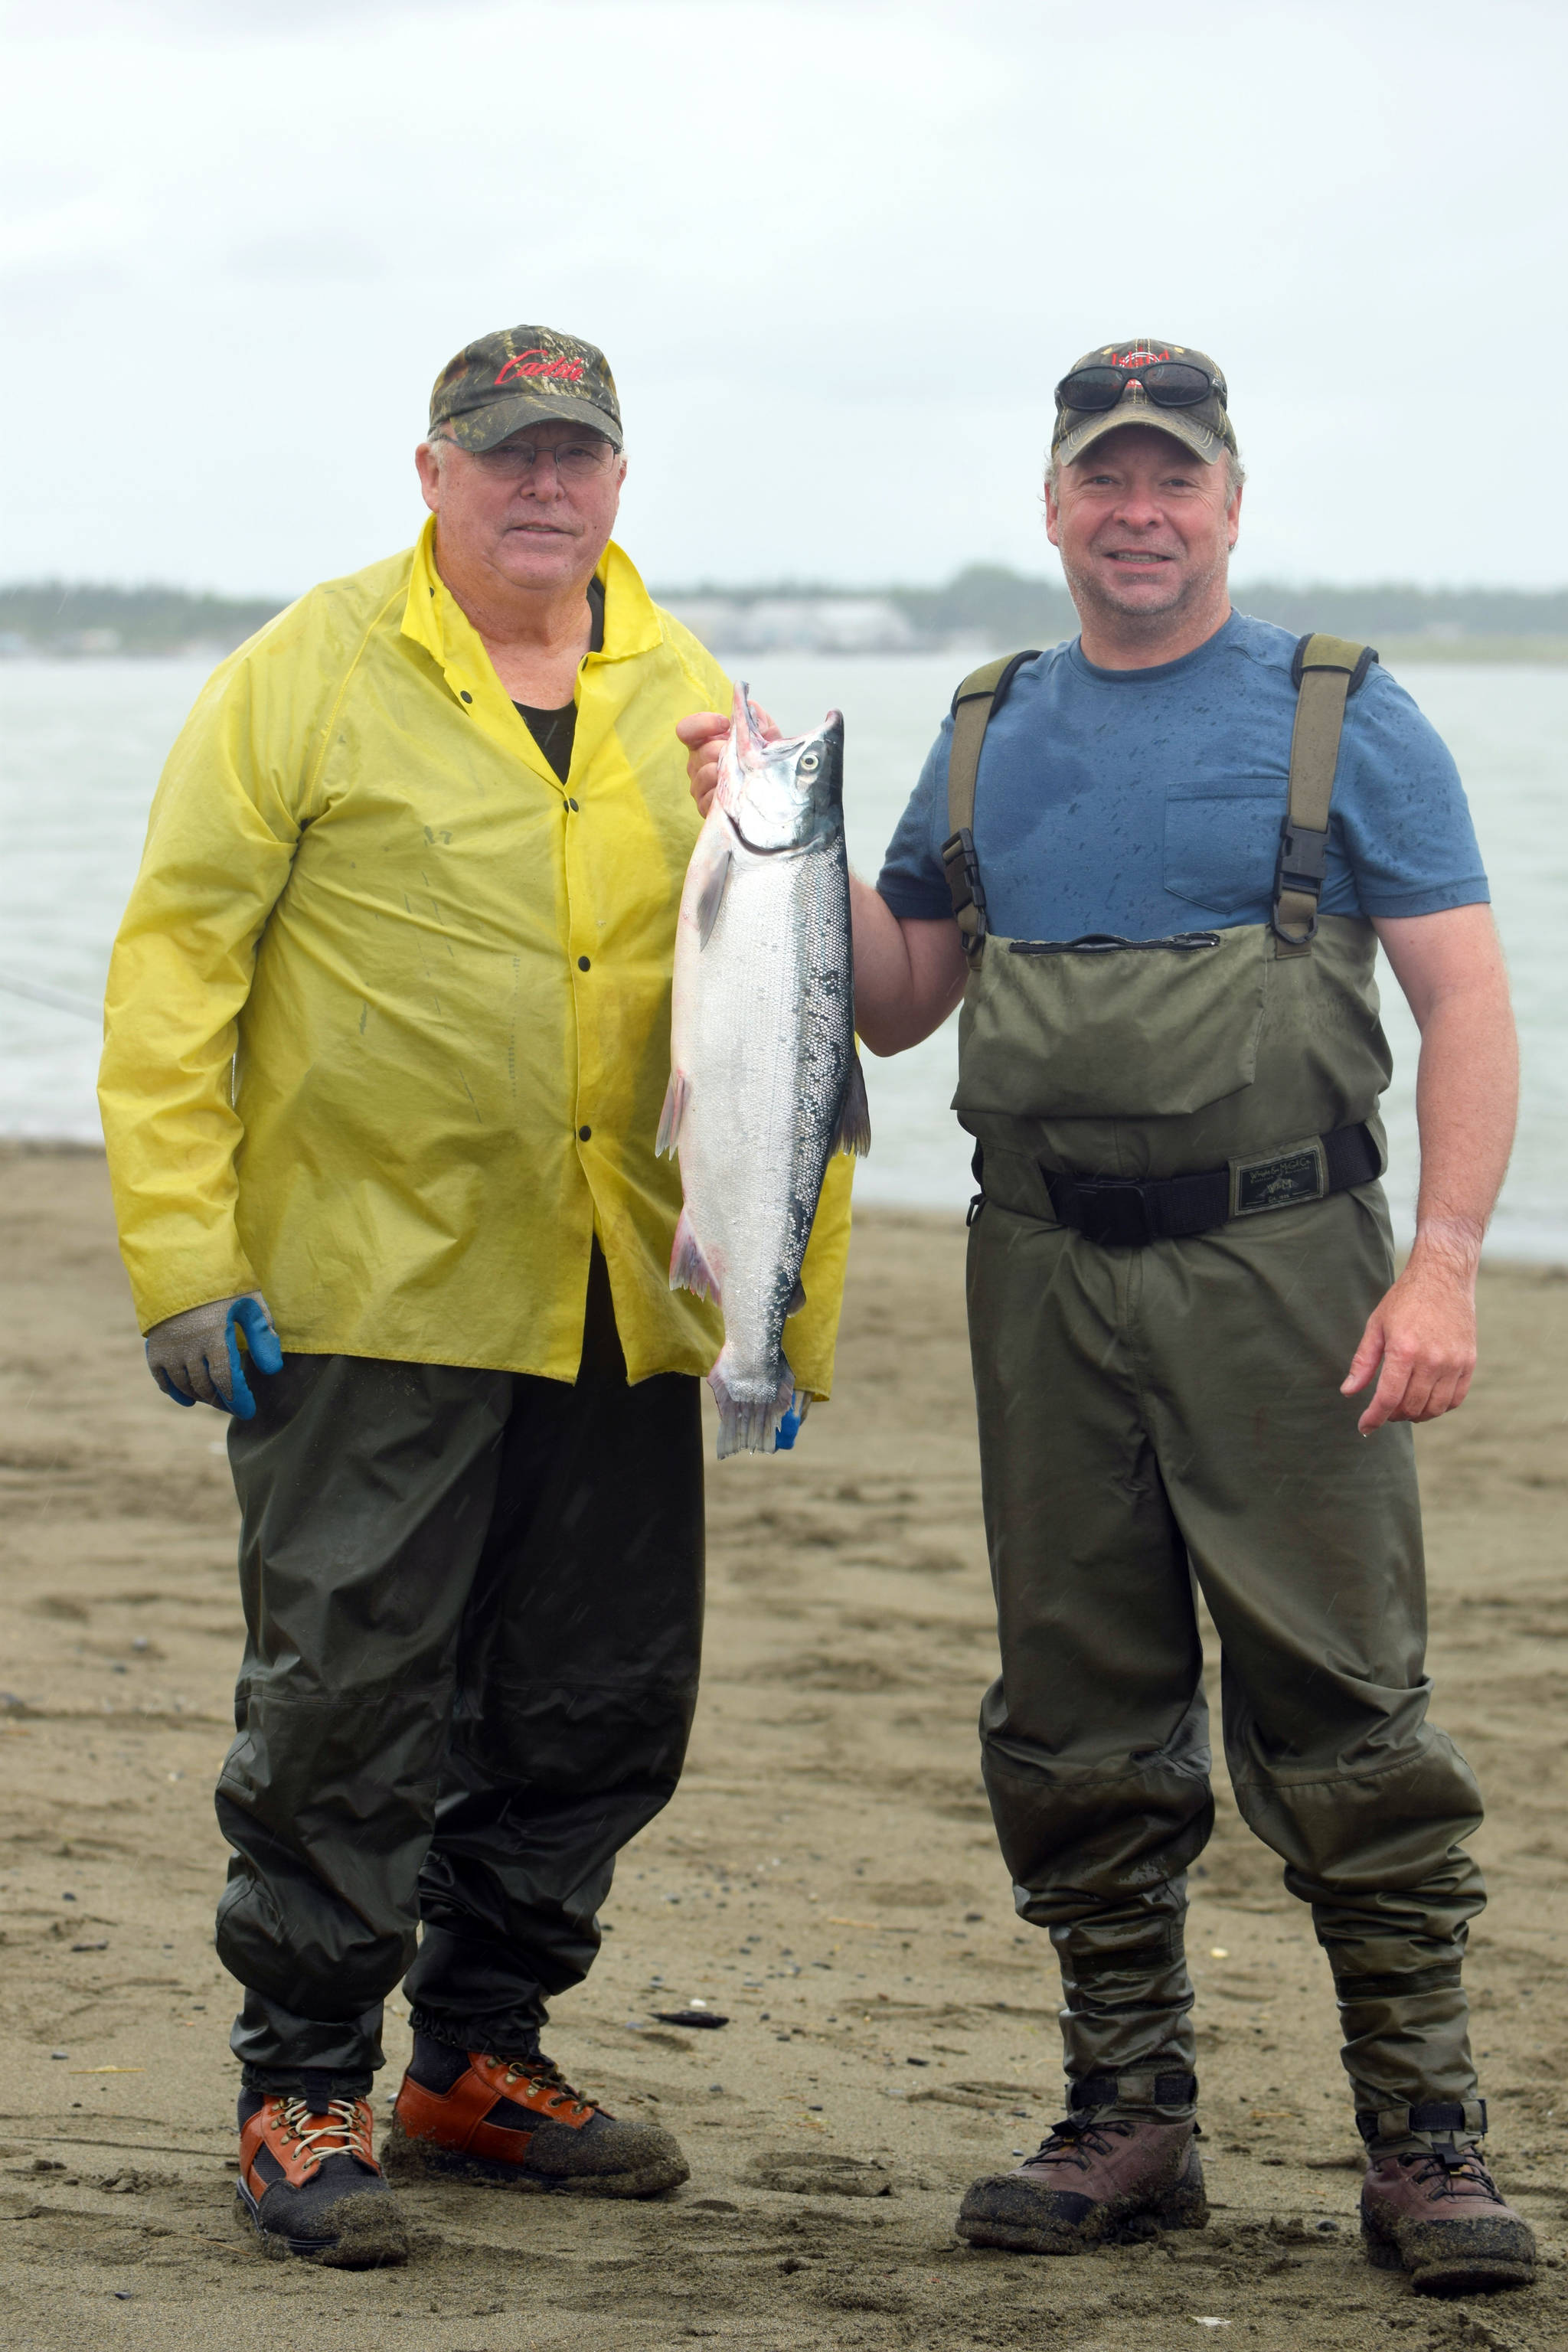 Fred, right, and Bob Kring show off their catch on Kenai Beach on Tuesday, July 10, 2018, in Kenai, Alaska. The two, who regularly travel to Kenai to participate in the dipnetting season, said the fishing had been “terrible” so far this year. Even so, they had snagged two salmon and a flounder by mid-afternoon Tuesday. (Photo by Erin Thompson/Peninsula Clarion)